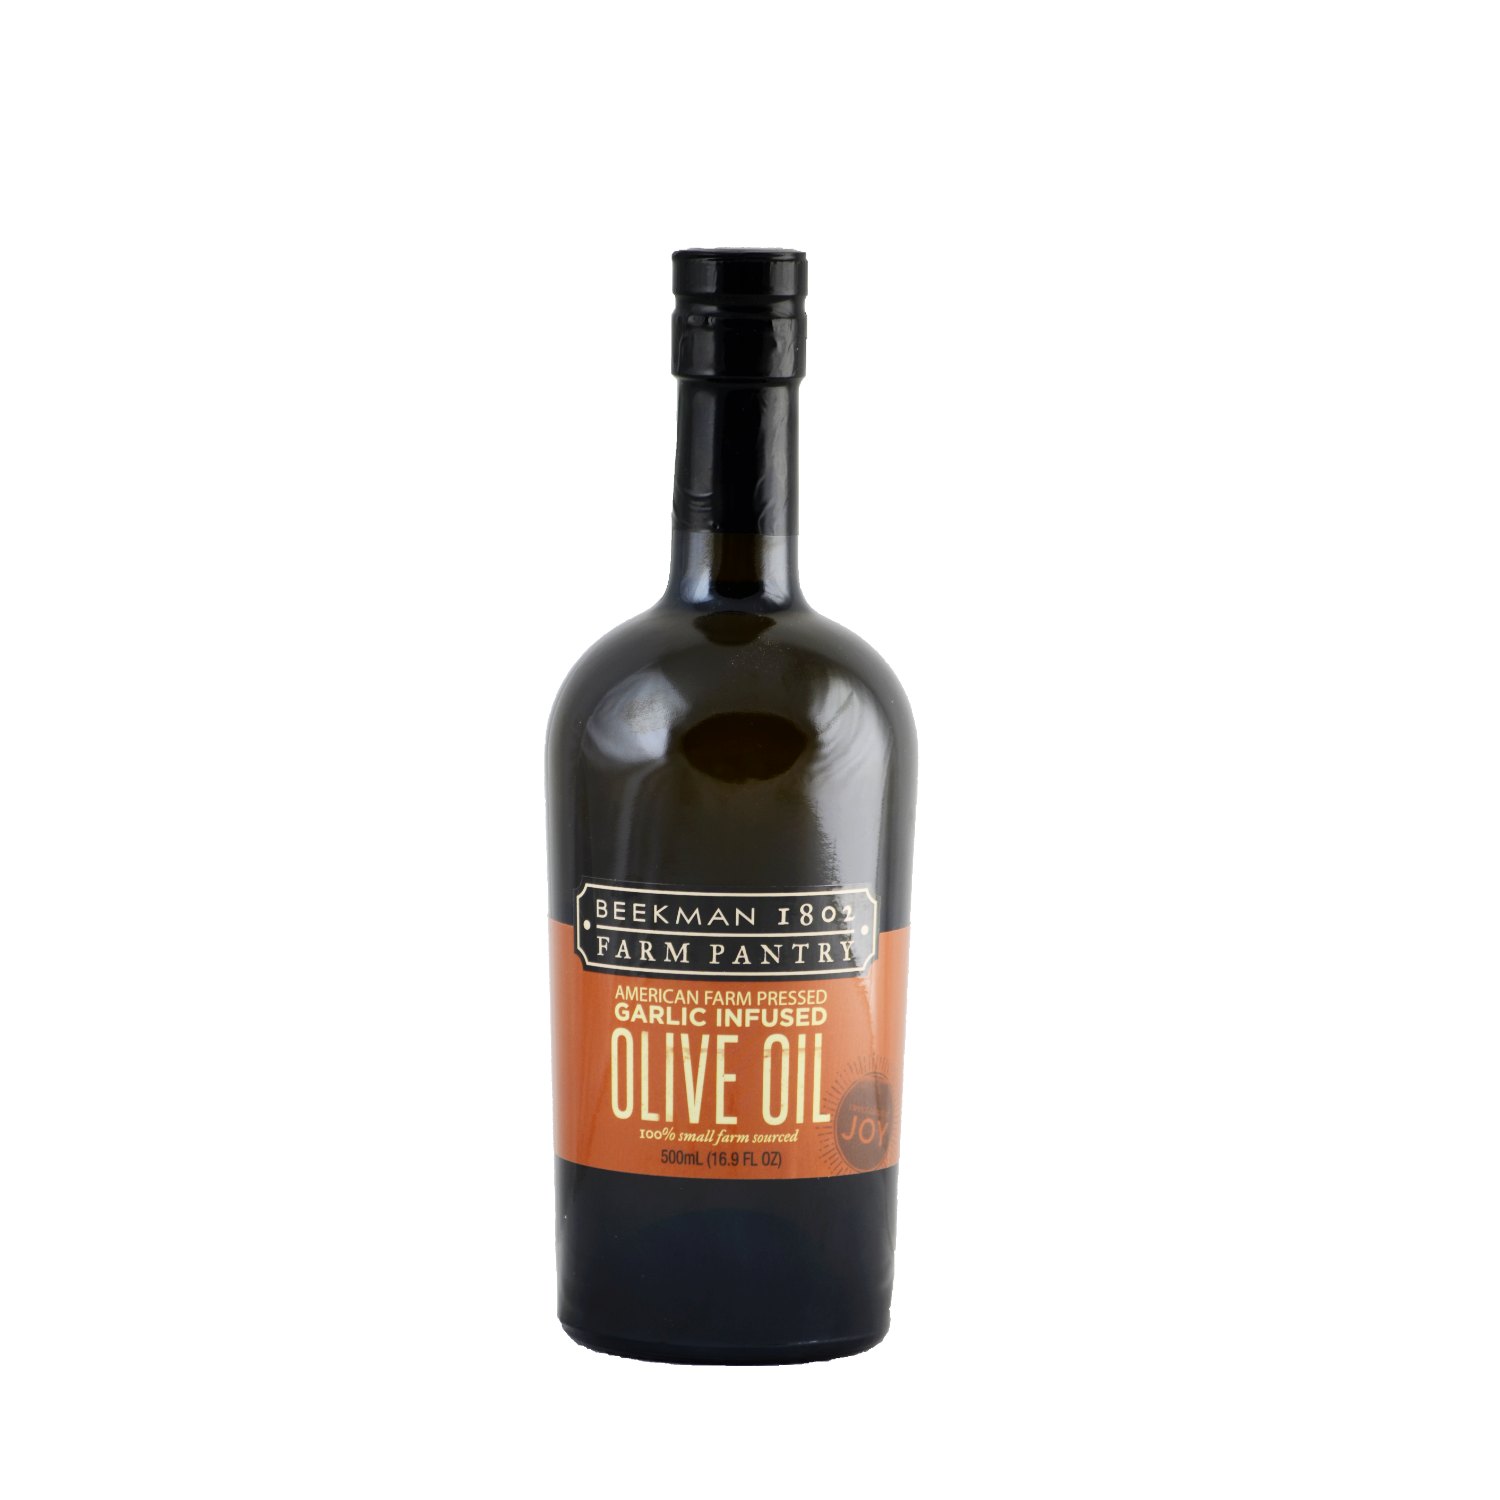 Farm Pantry Garlic Infused Olive Oil - 100% American Olives